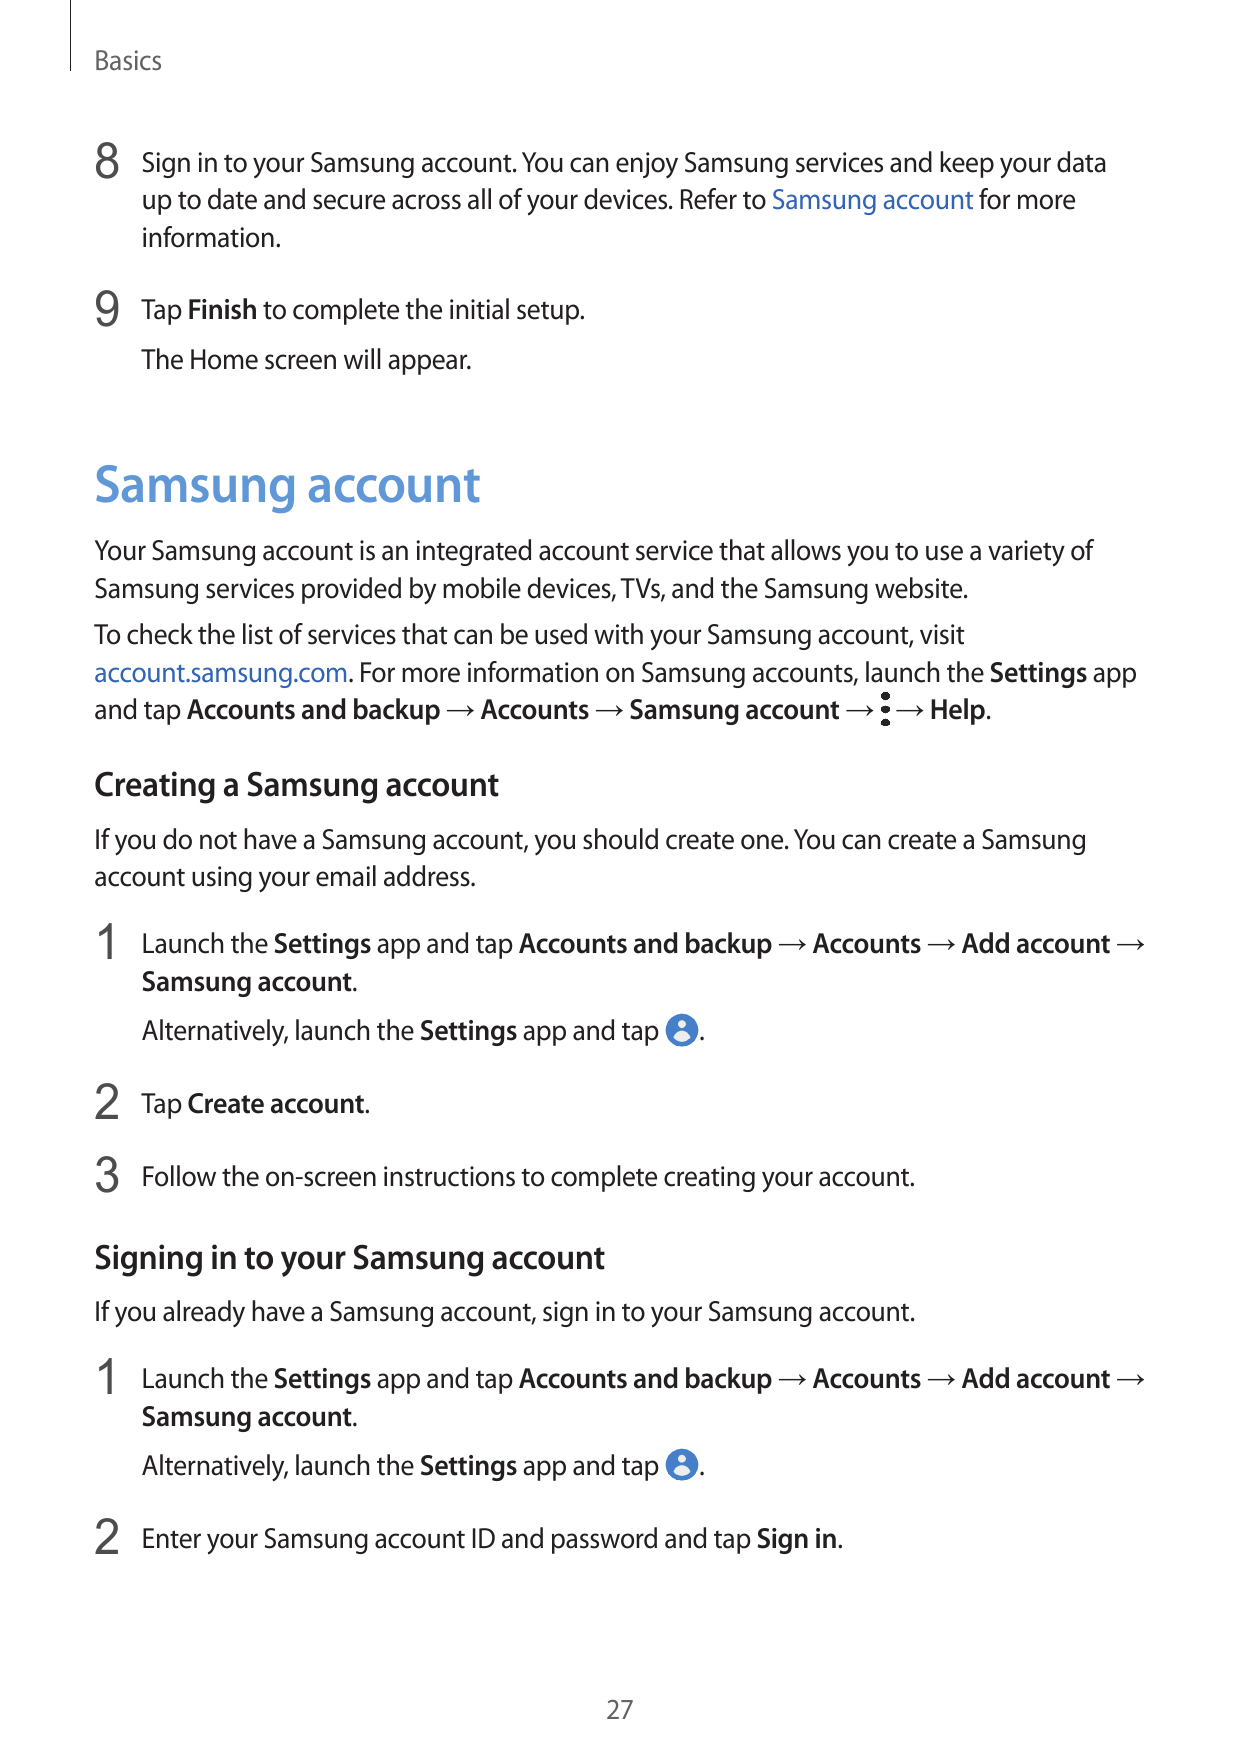 Basics8 Sign in to your Samsung account. You can enjoy Samsung services and keep your dataup to date and secure across all of yo